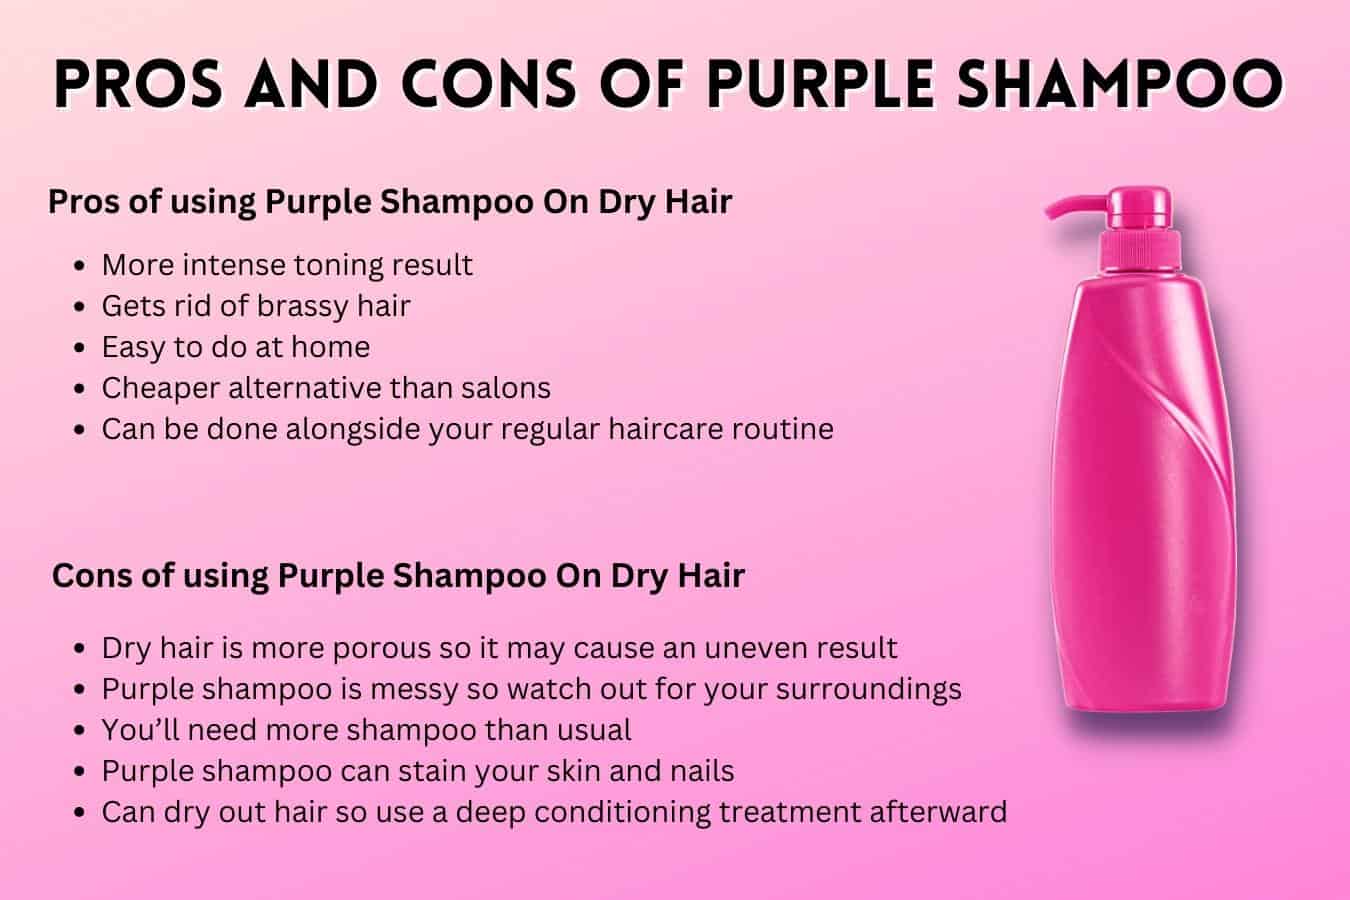 Pros and Cons of using Purple Shampoo On Dry Hair